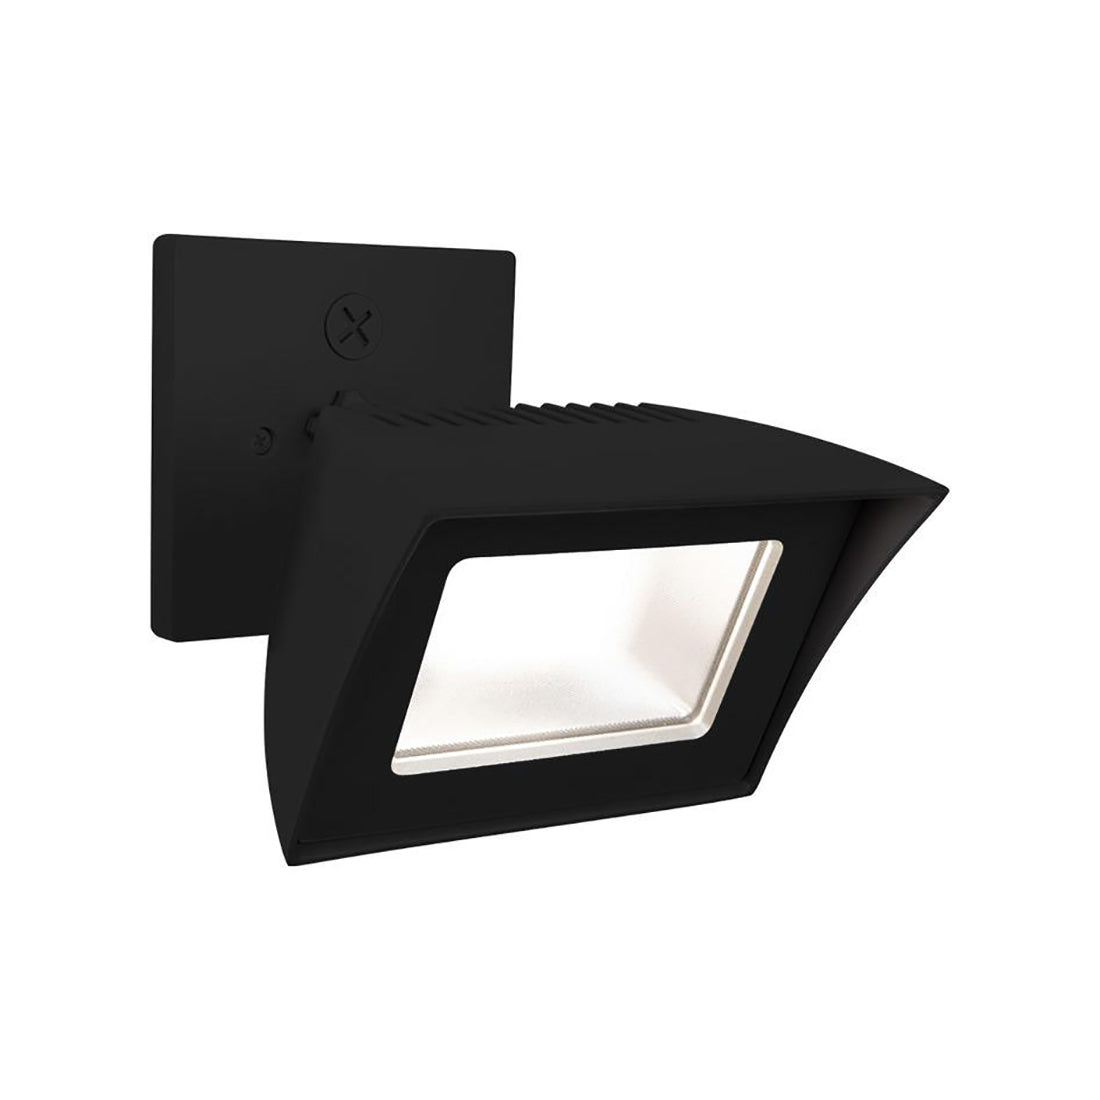 WAC Lighting WP-LED335-30-aWT Contemporary Endurance Flood Light Outdoor Indoor Wall Pack - 1